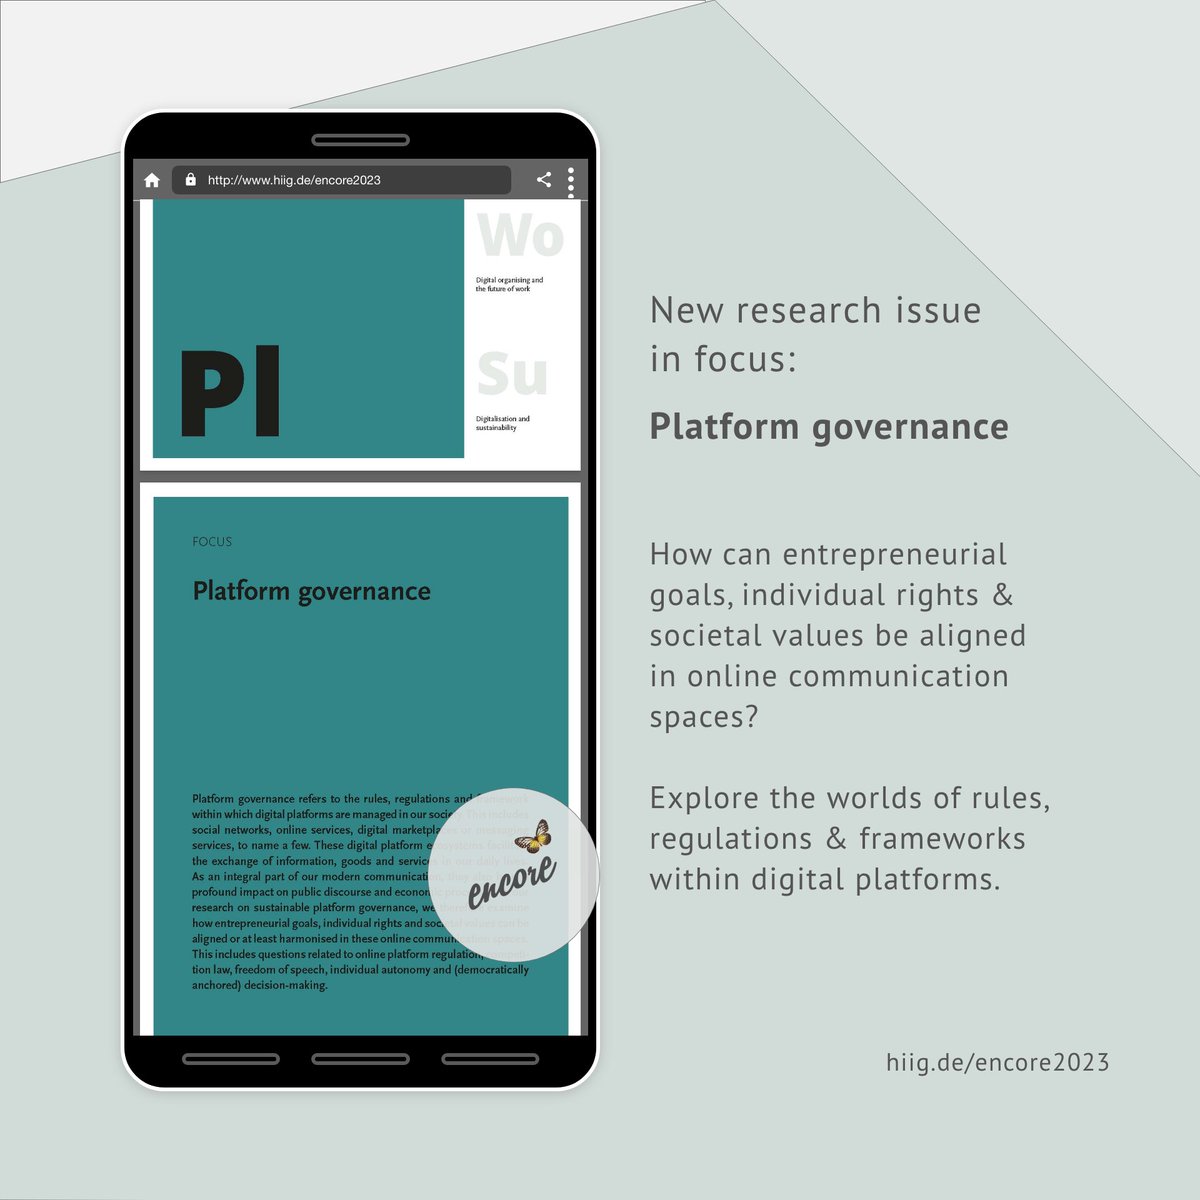 Our encore magazine features the highlights from our research in the field of 'Platform Governance'. Explore how entrepreneurial goals, individual rights & societal values can be aligned in online communication spaces. 📄More info & full magazine: hiig.de/en/encore